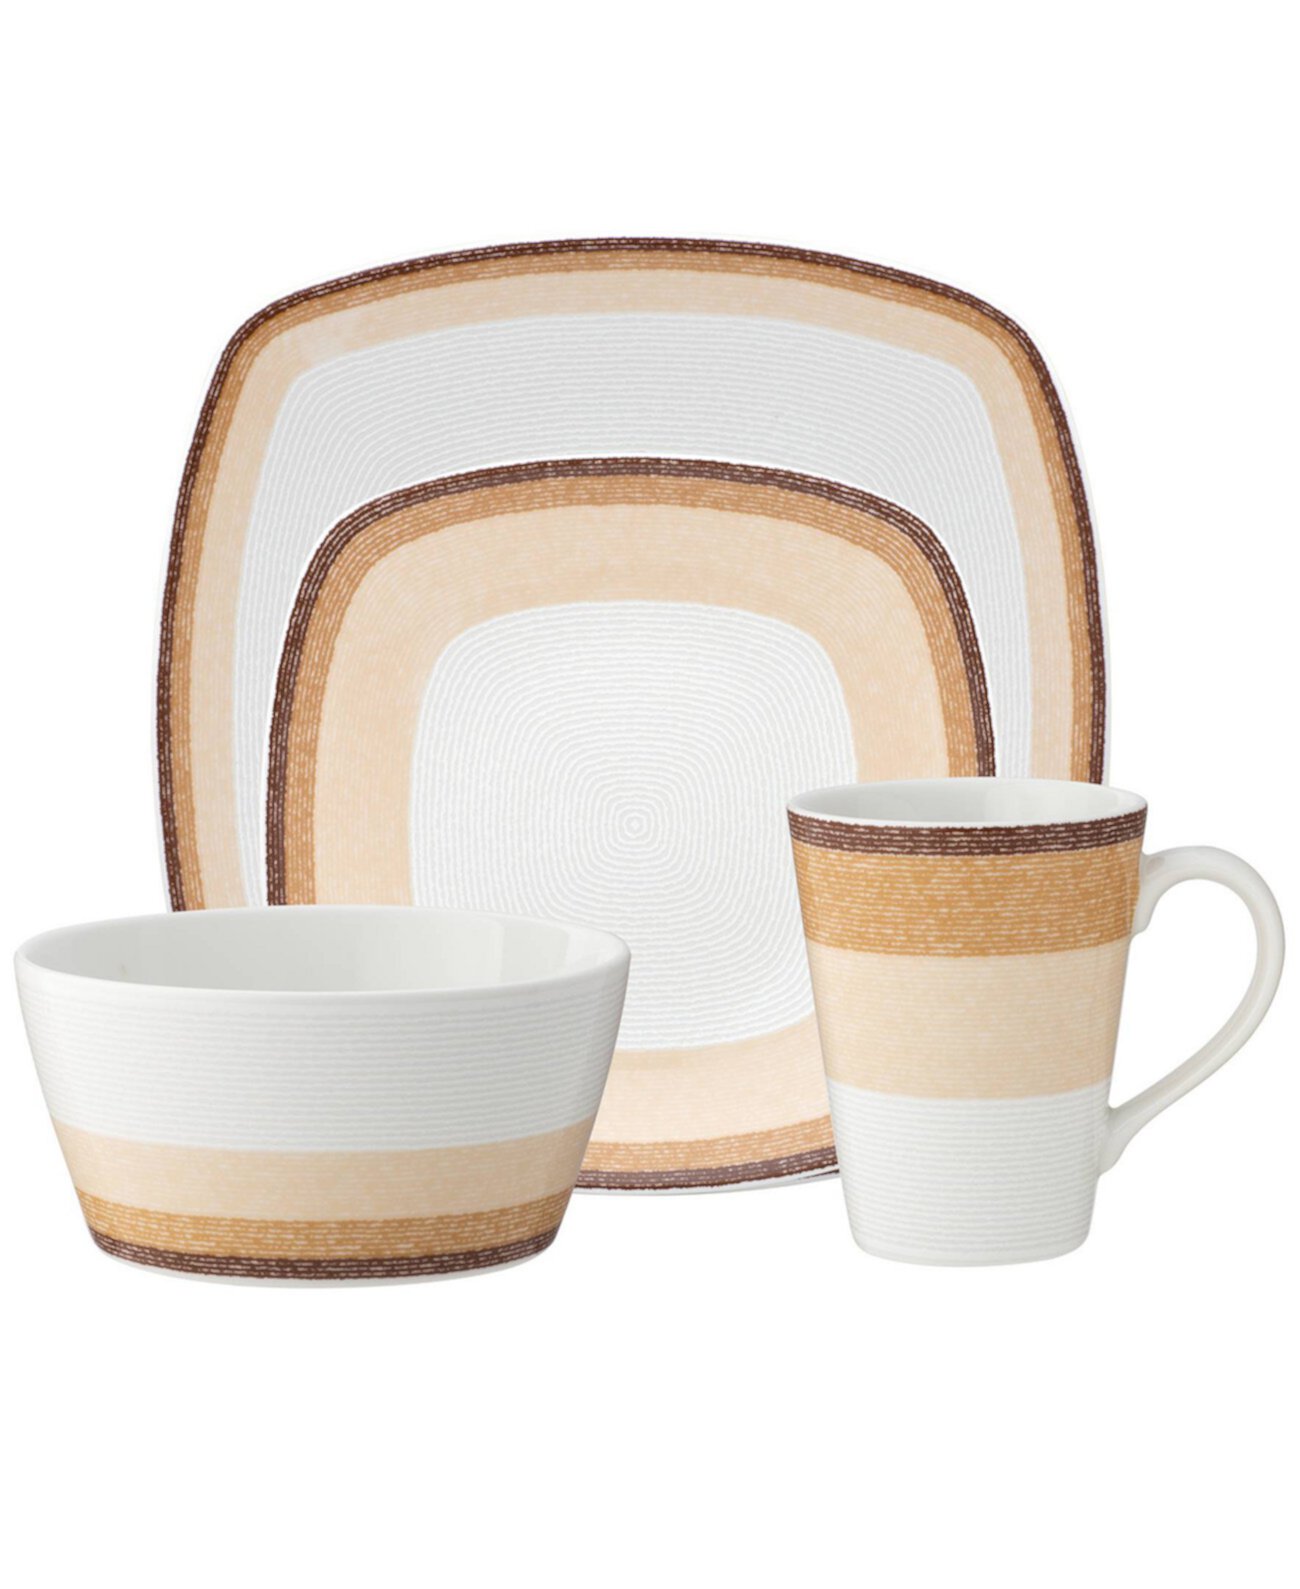 Colorscapes Desert Layers 4 Piece Square Place Setting Noritake